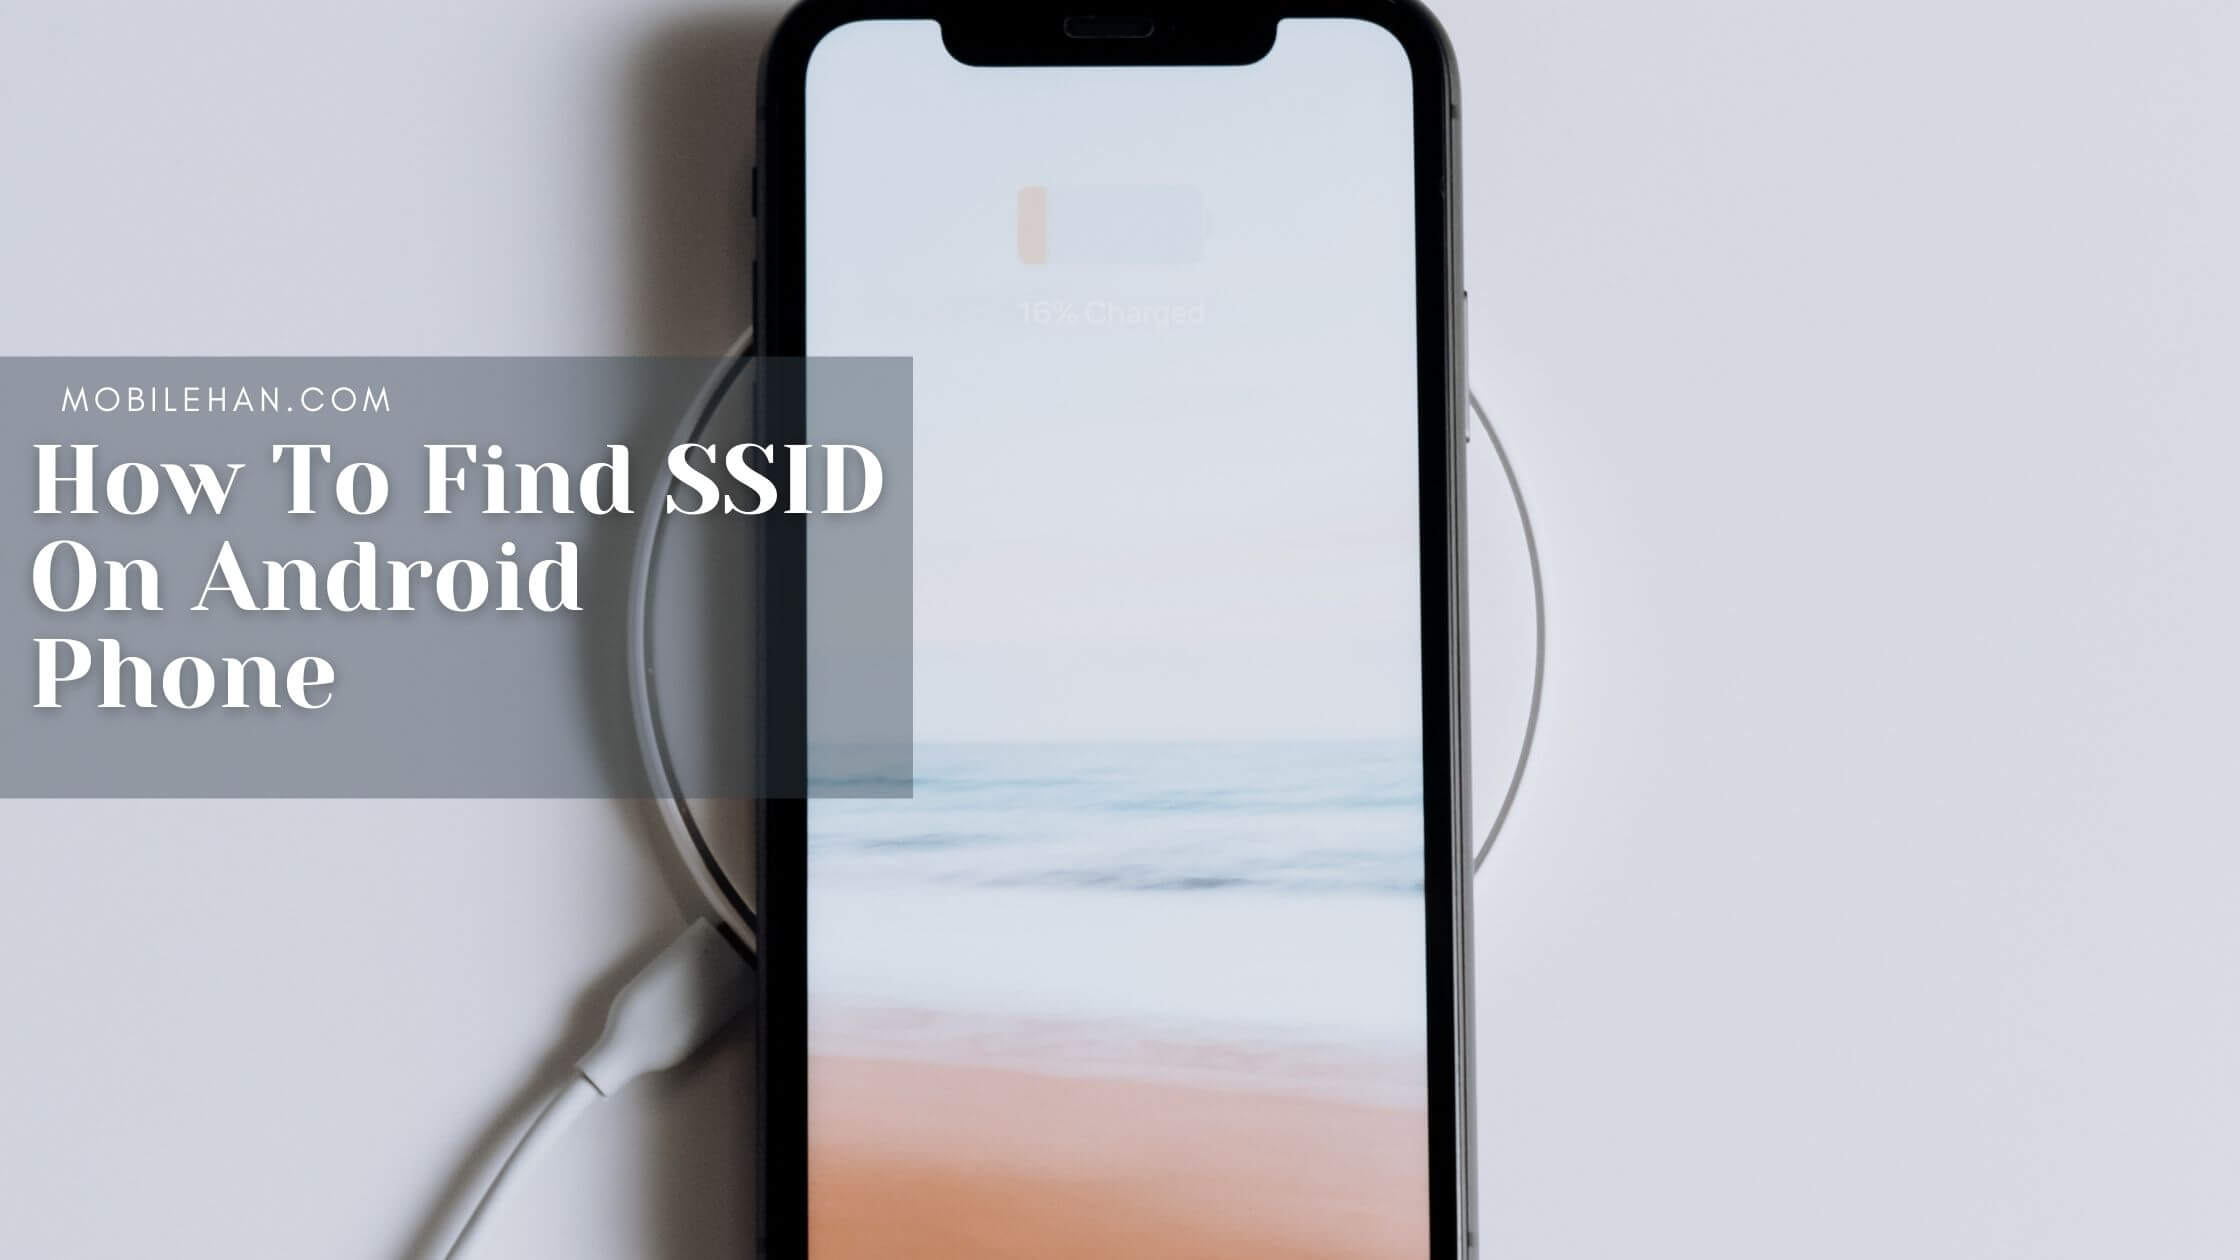 How To Find SSID on Android Phone